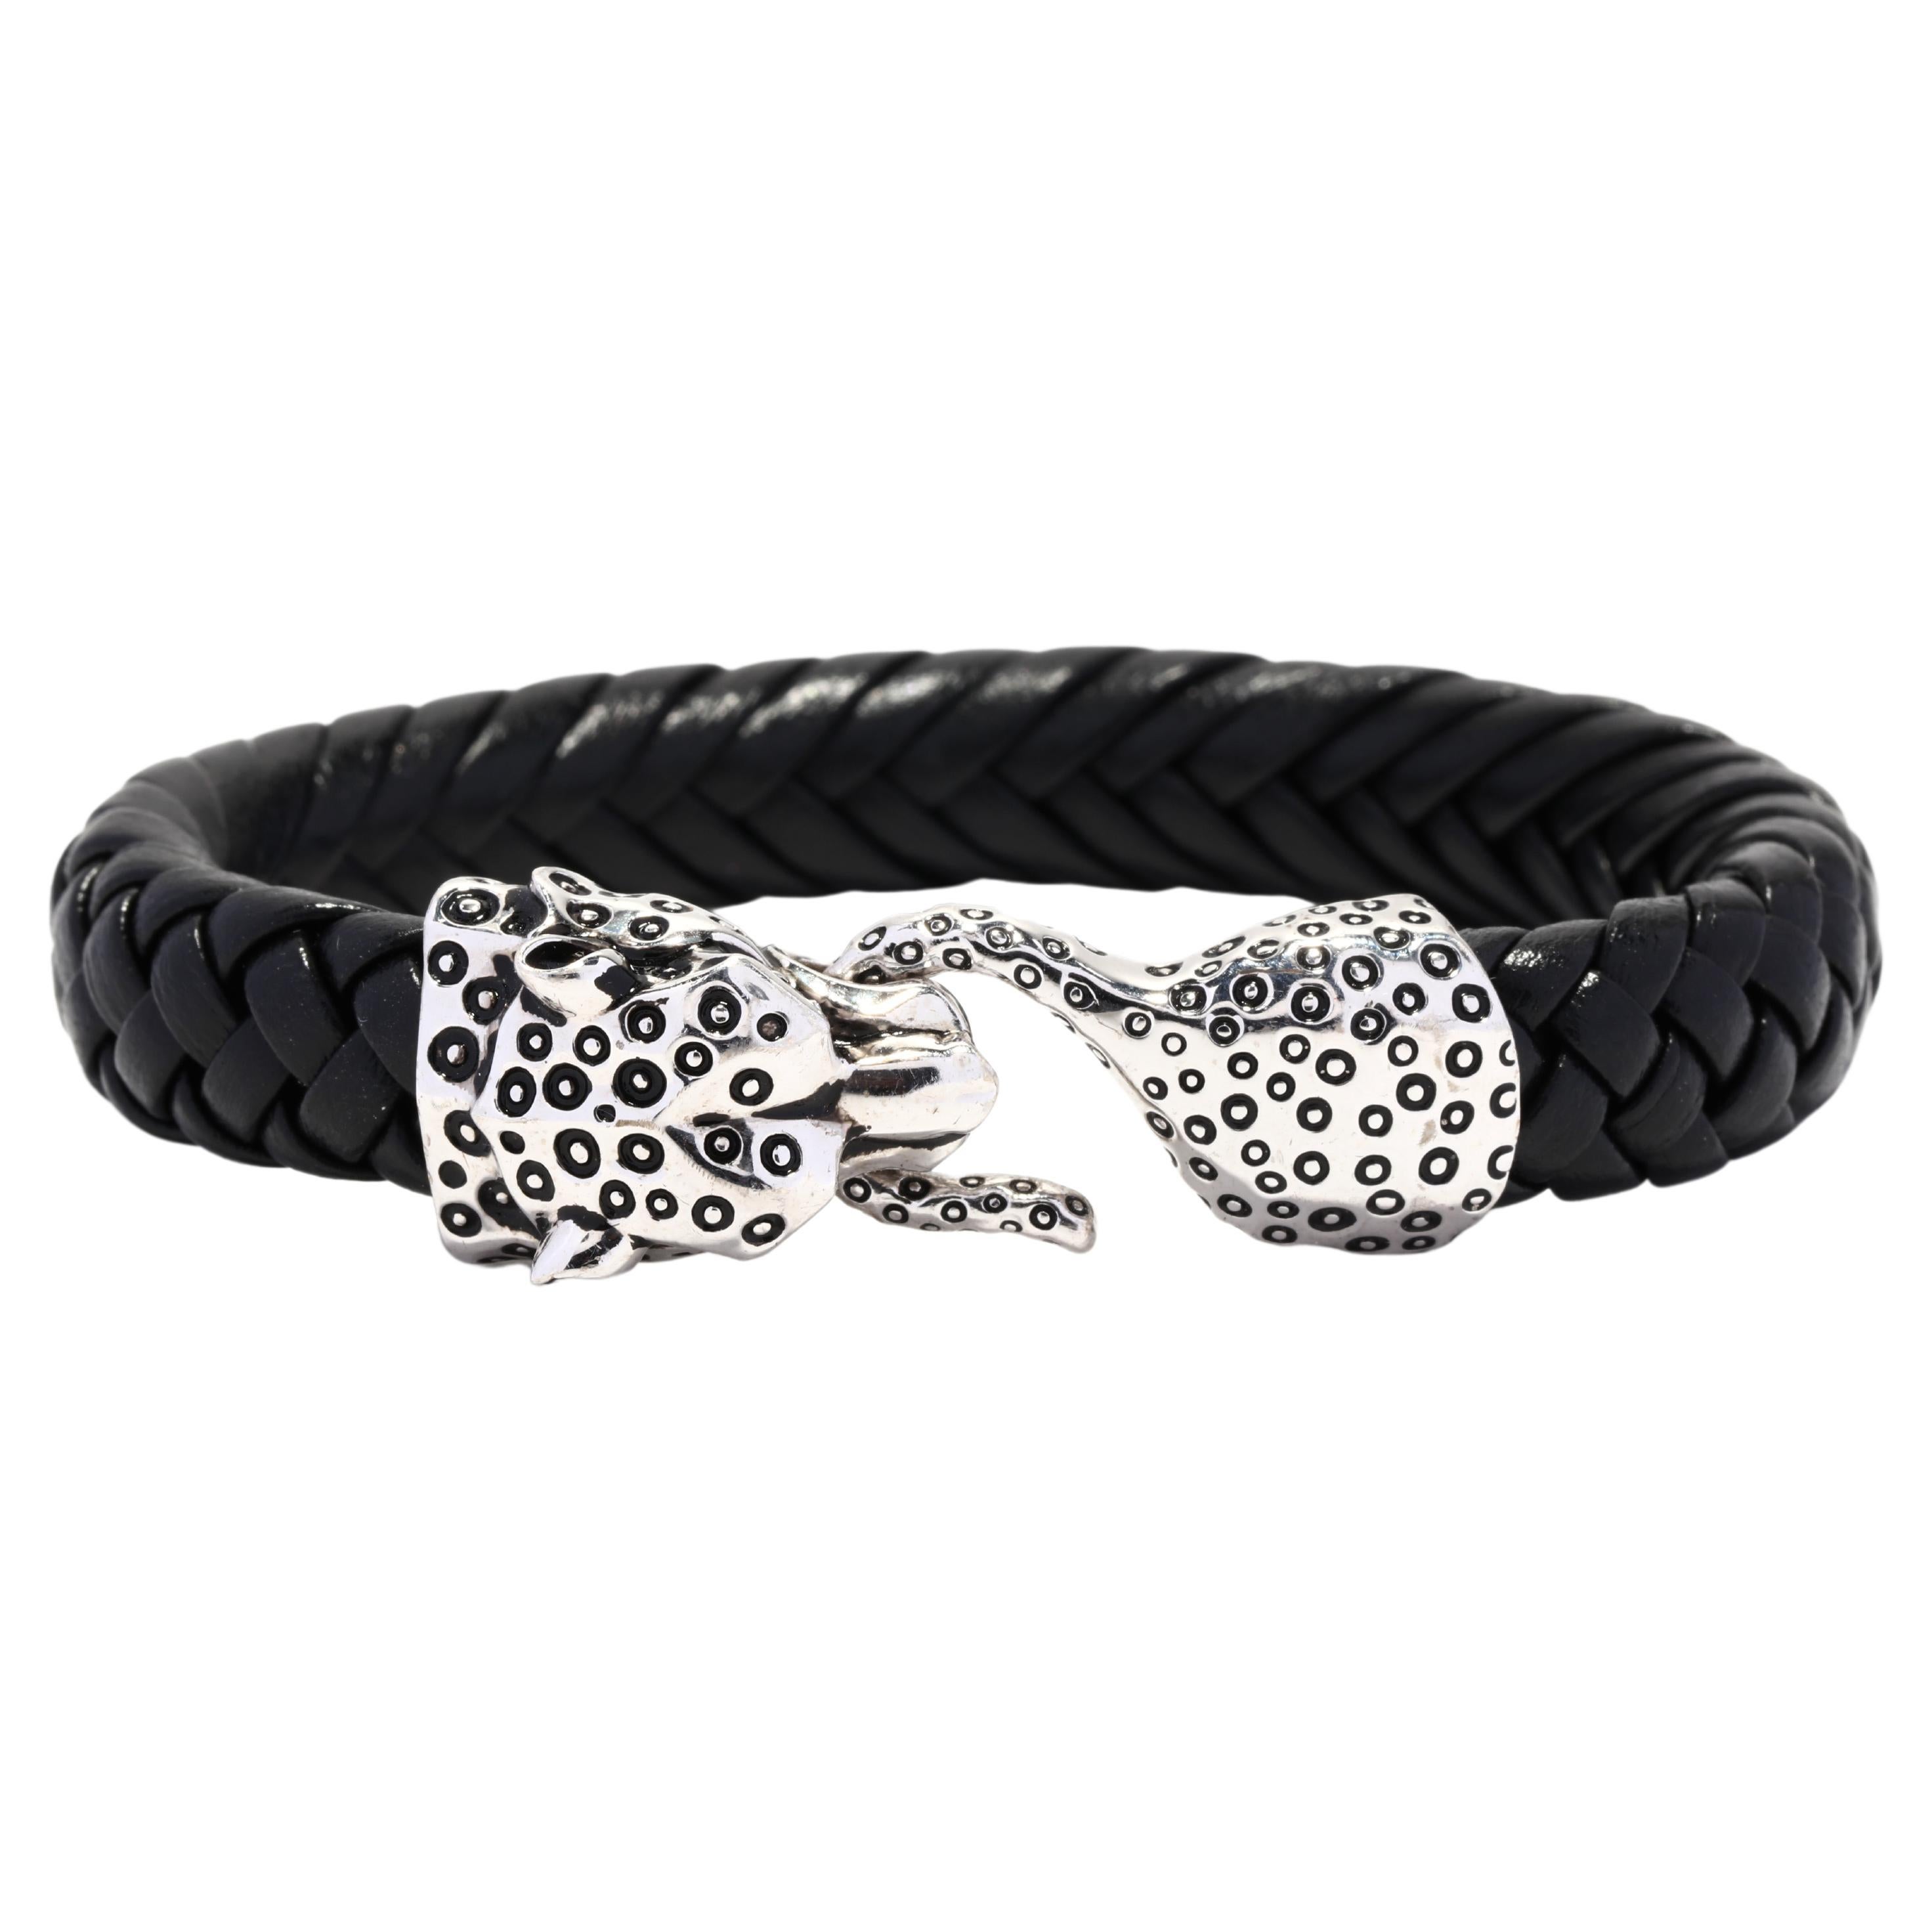 An Effy sterling silver cheetah braided leather bracelet. This gent's leather bracelet features a black braided leather bracelet with a cheetah head motif hook and eye clasp.

Length: 7.75 in.

Width: 5/8 in.

Weight: 21.6 dwts. / 33.6